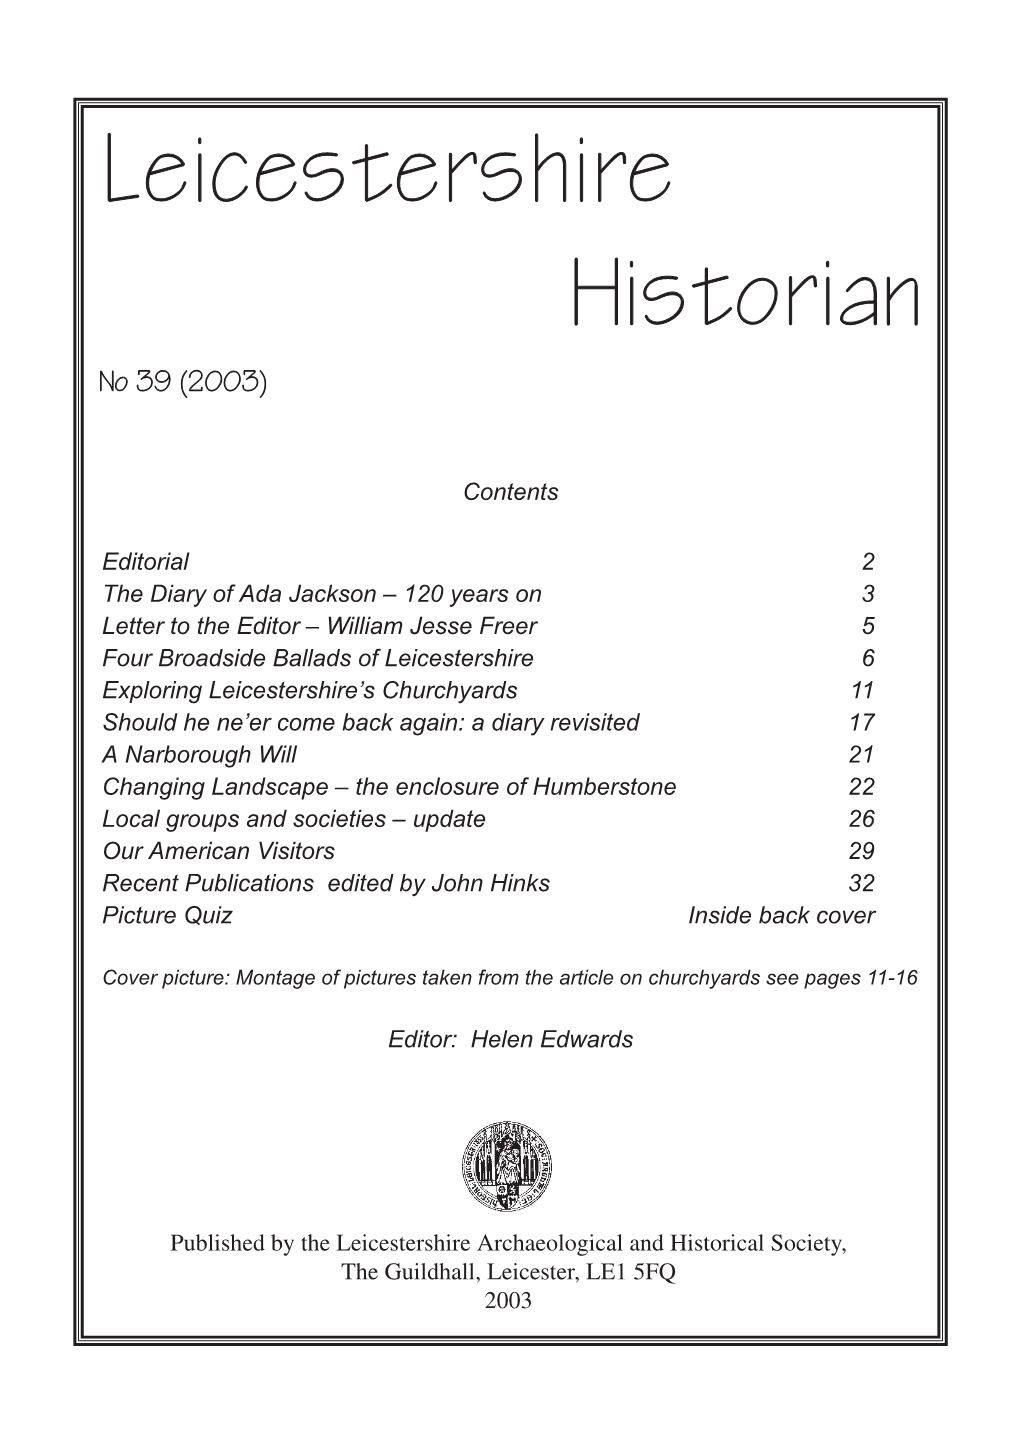 Download the 2003 Leicestershire Historian